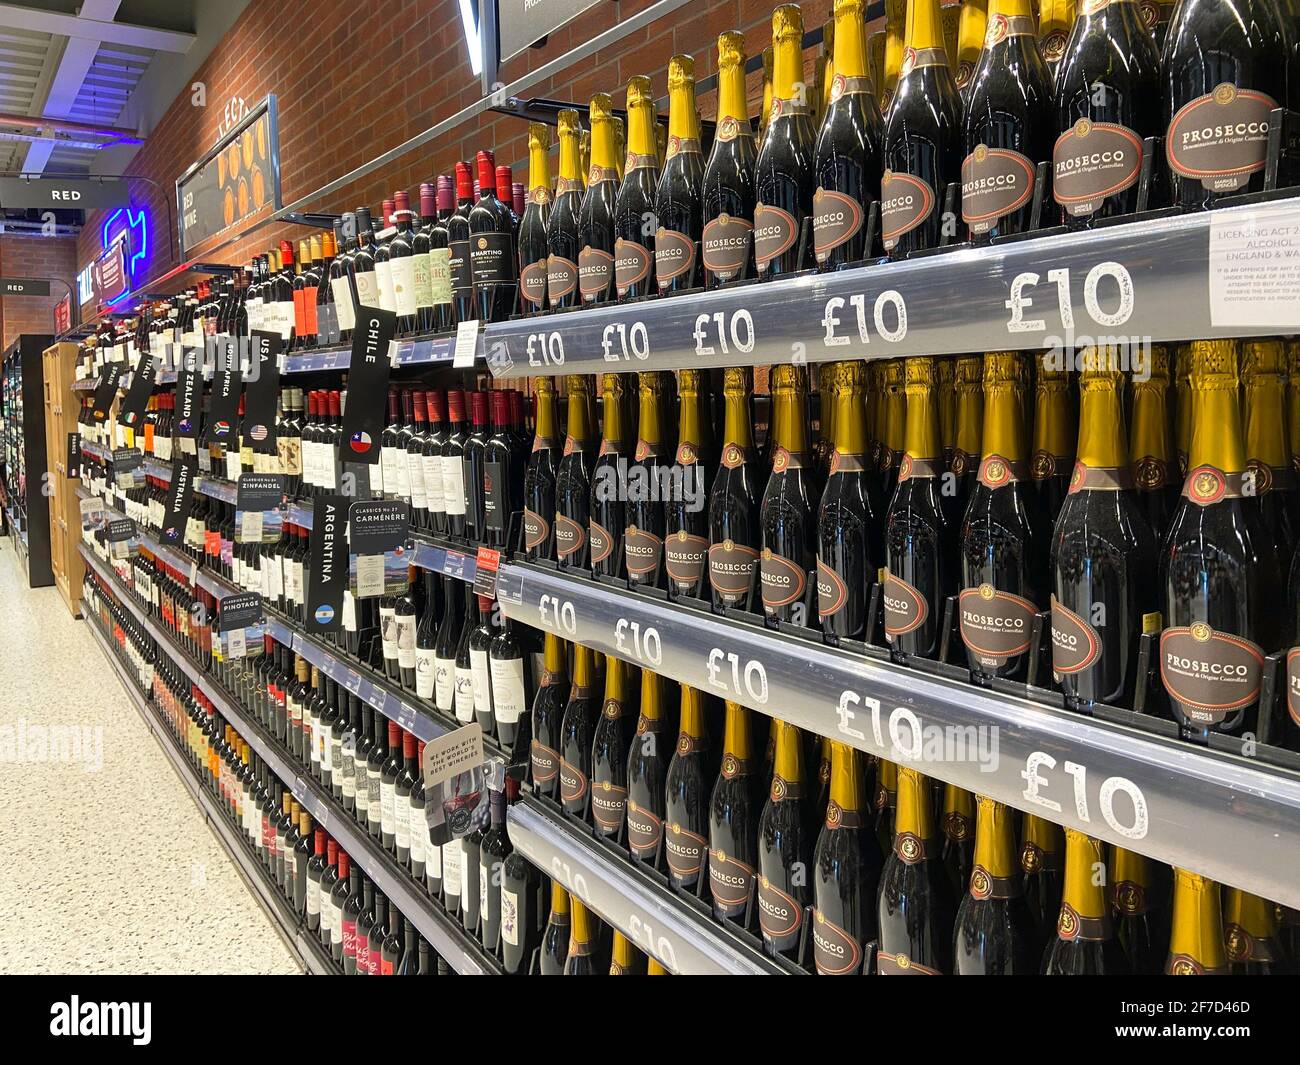 Wine section inside M&S Food supermarket, Two Rivers Shopping Centre,  Staines-upon-Thames, Surrey, England, United Kingdom Stock Photo